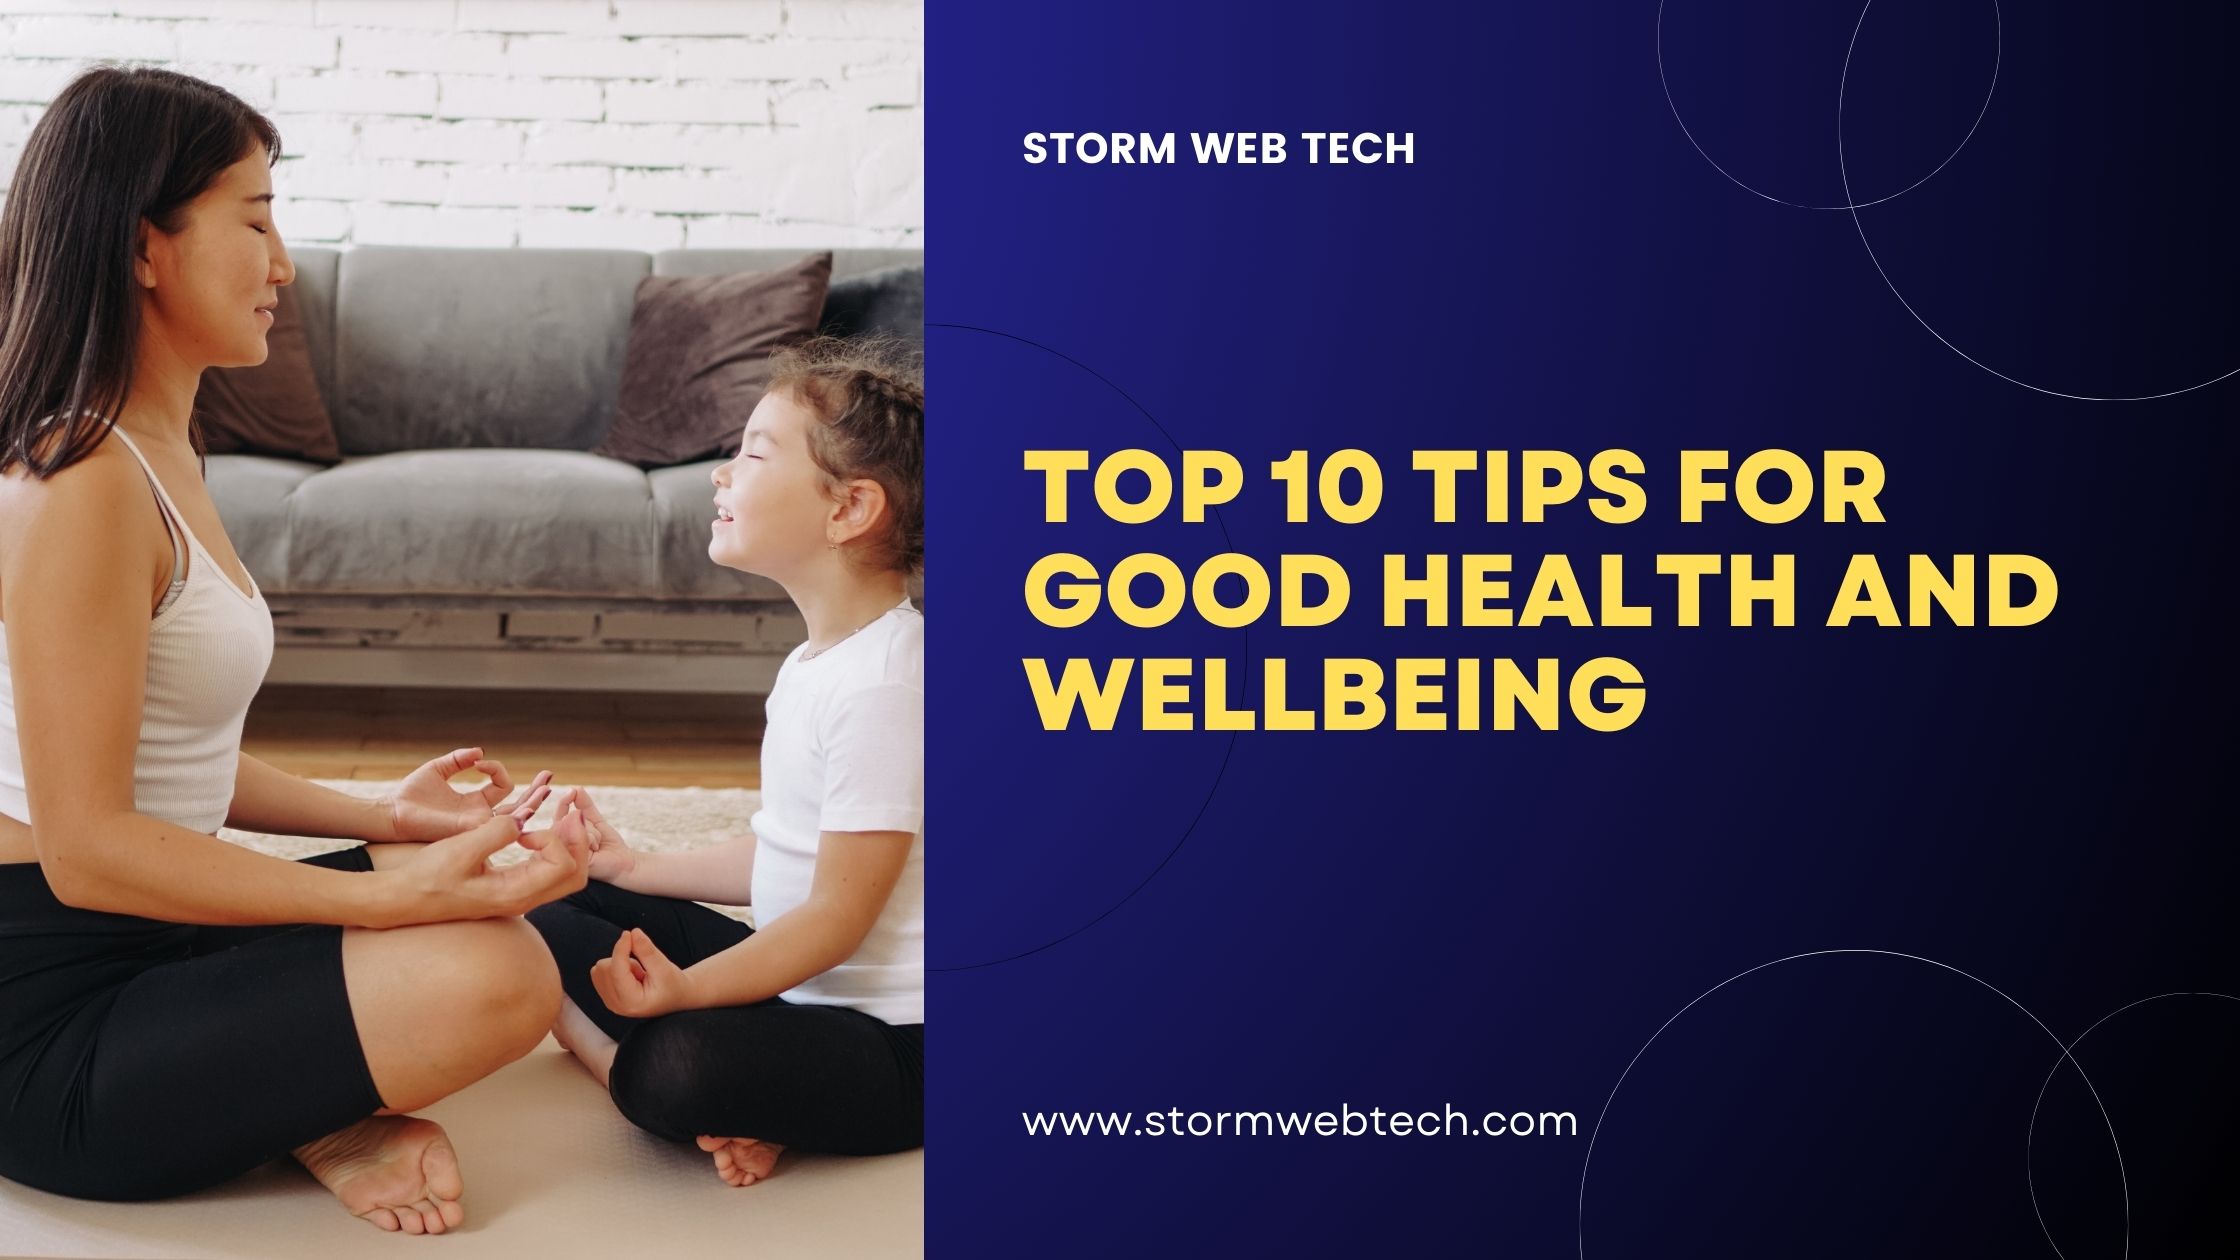 By incorporating these Top 10 Tips for Good Health and Wellbeing into your daily routine, you can create a healthier and more fulfilling life